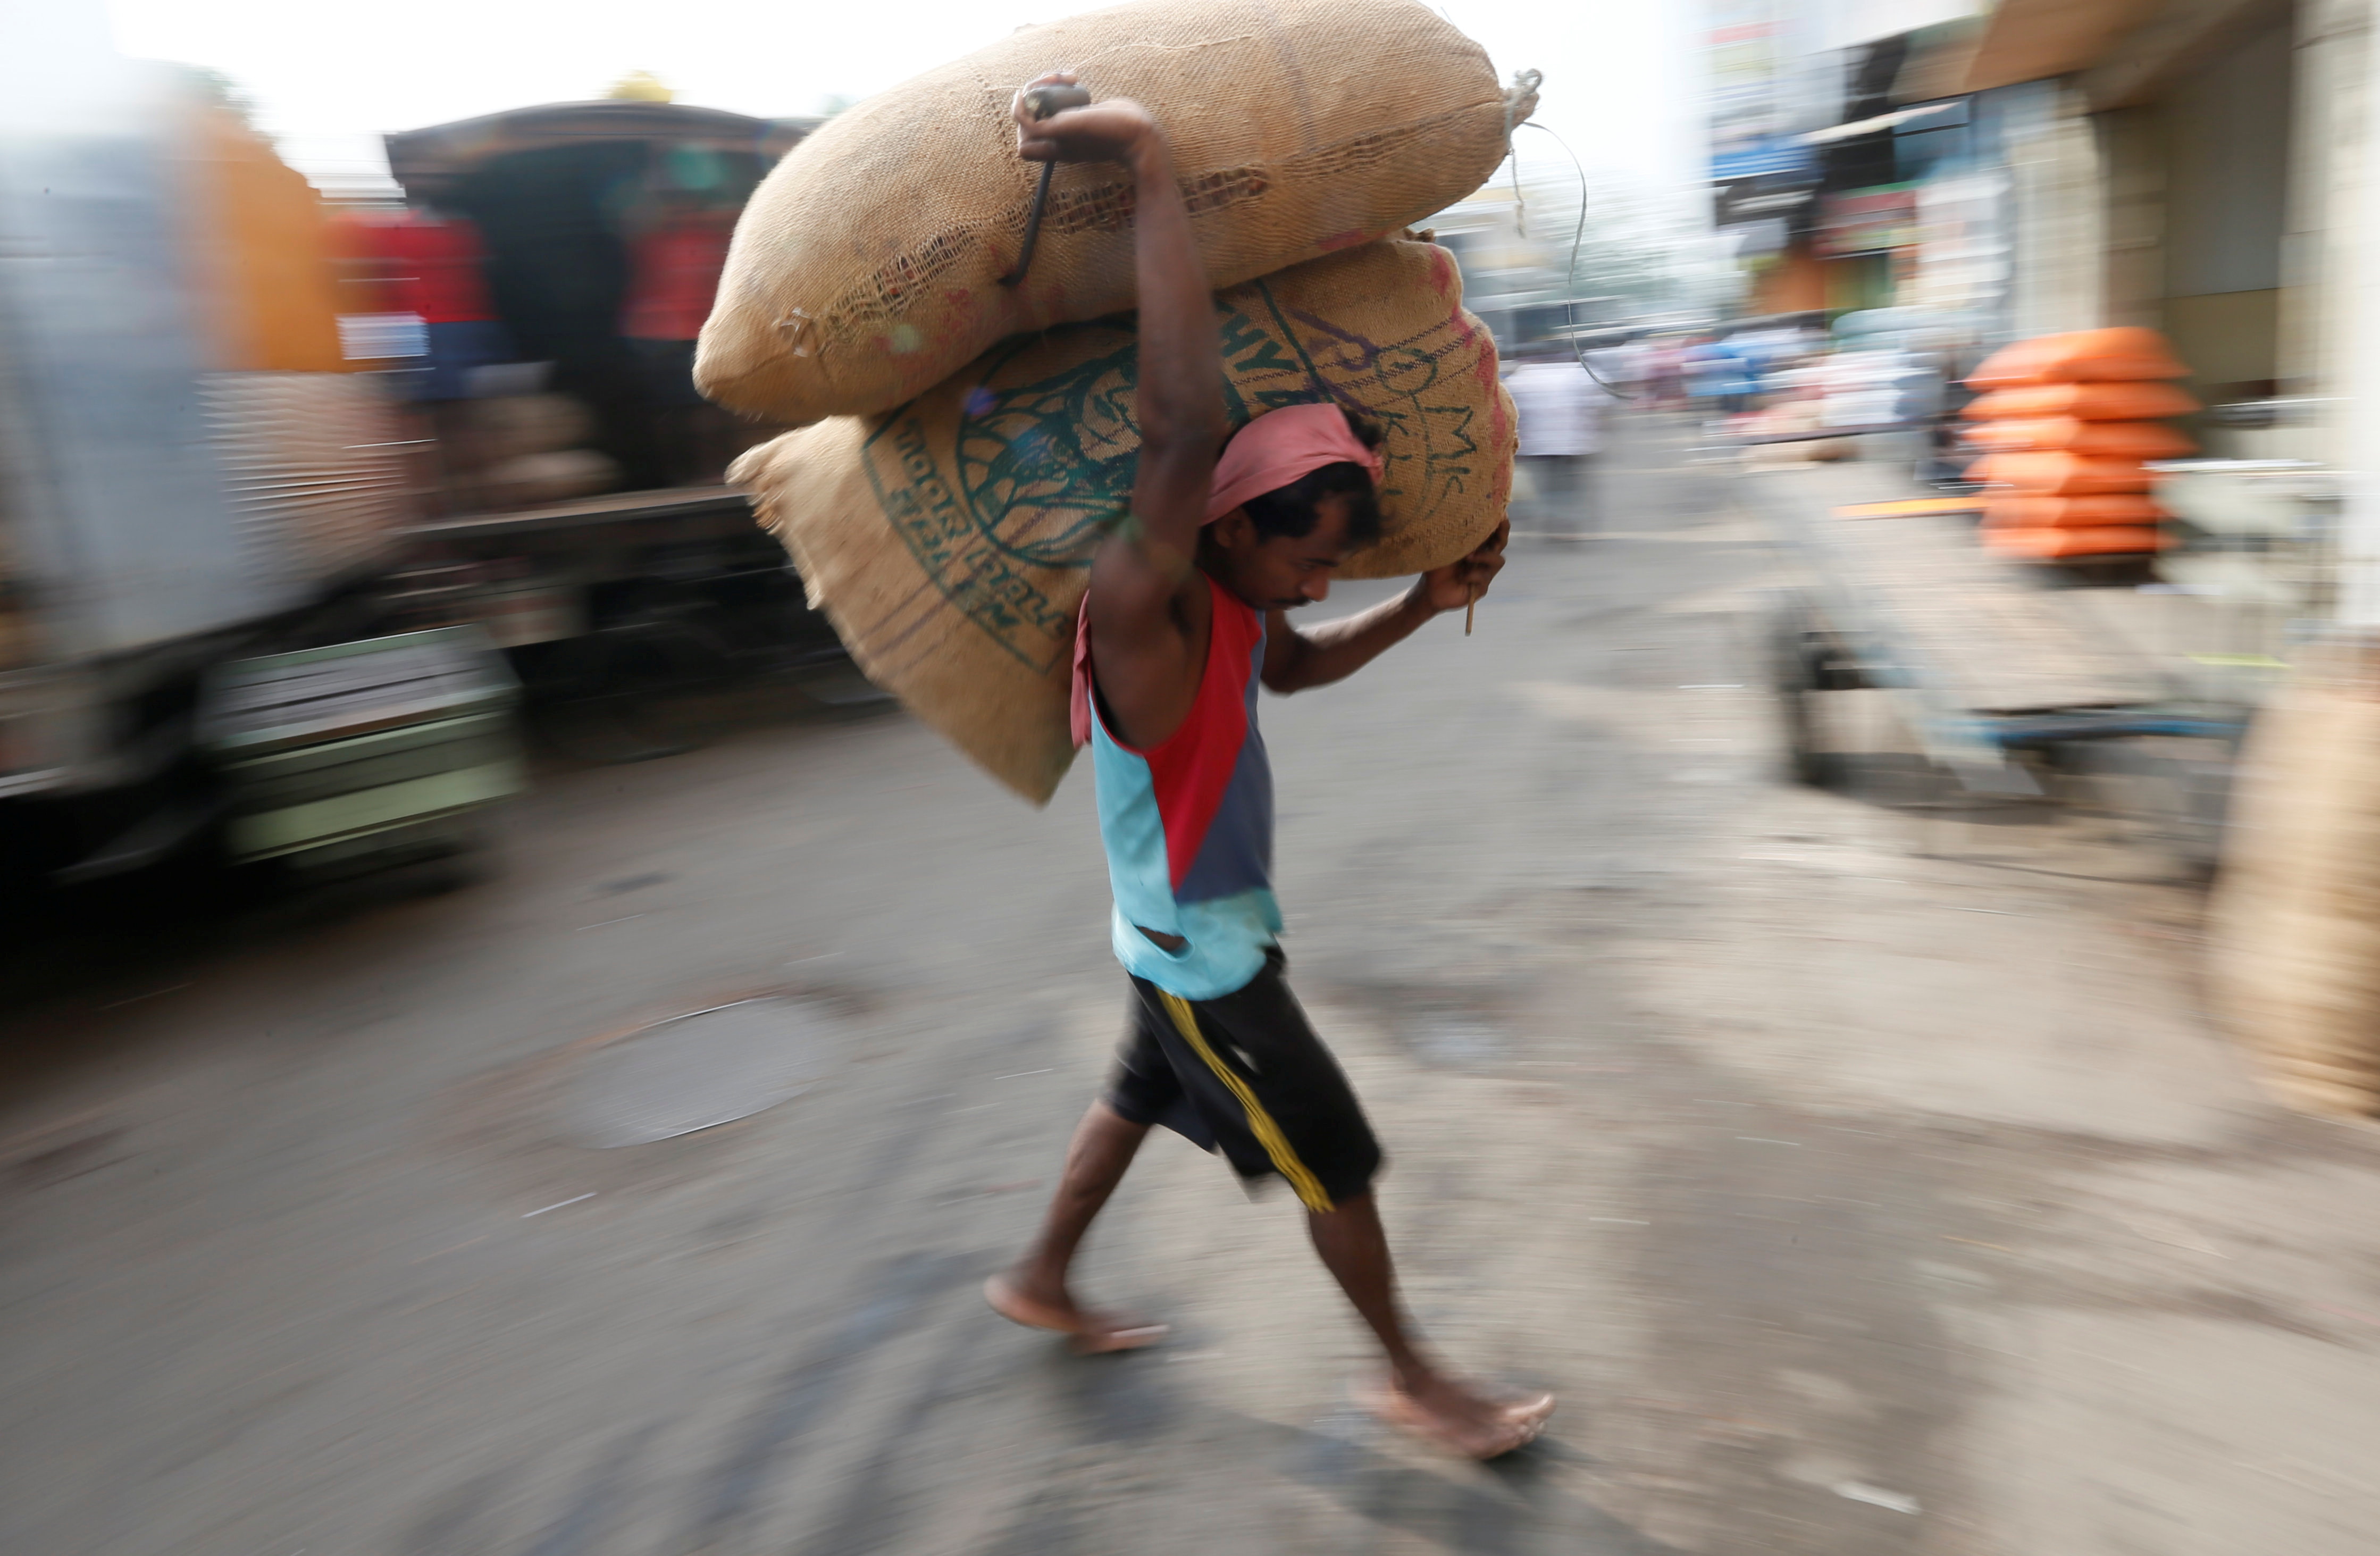 A worker carries a sack of rice at main market in Colombo